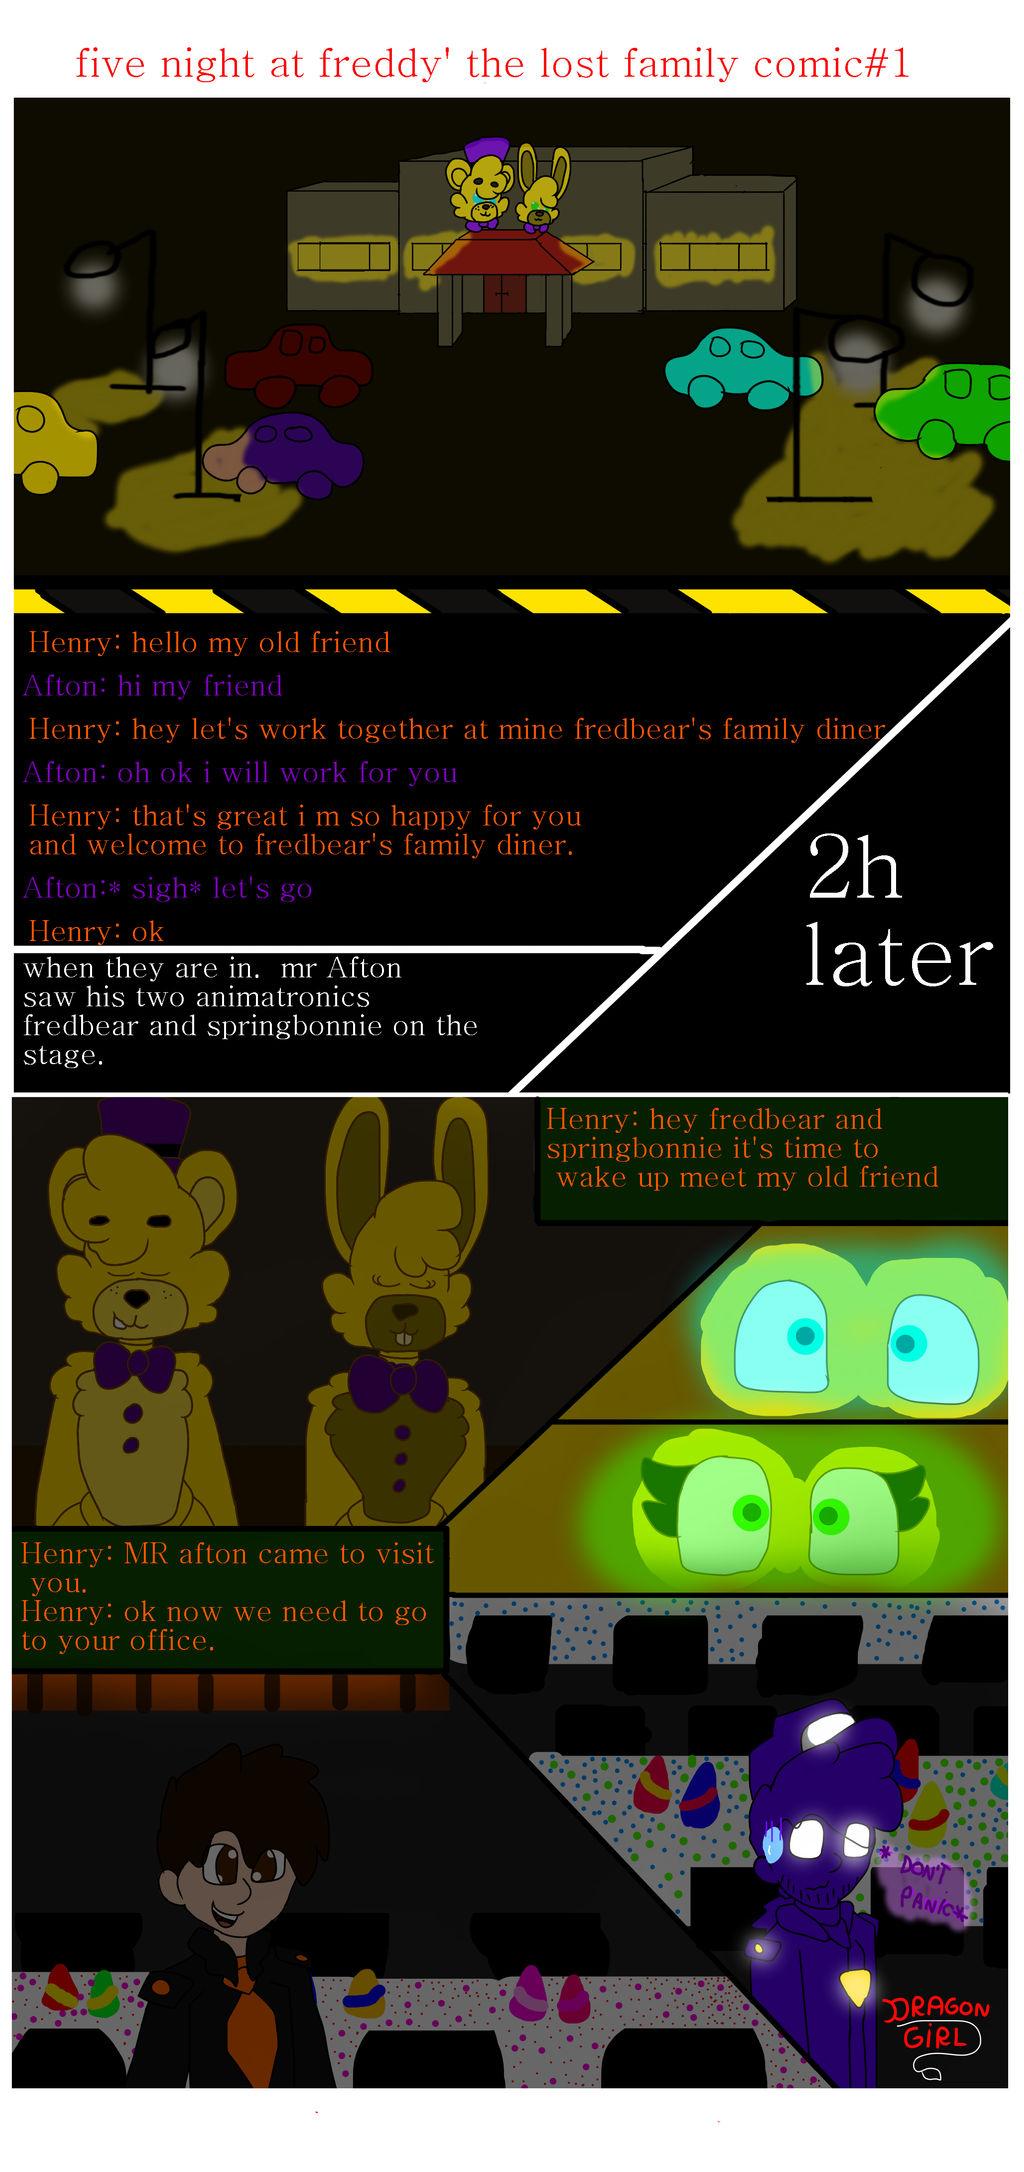 Five night at freddy's the lost family comic#1 by DragonGirl658 on ...